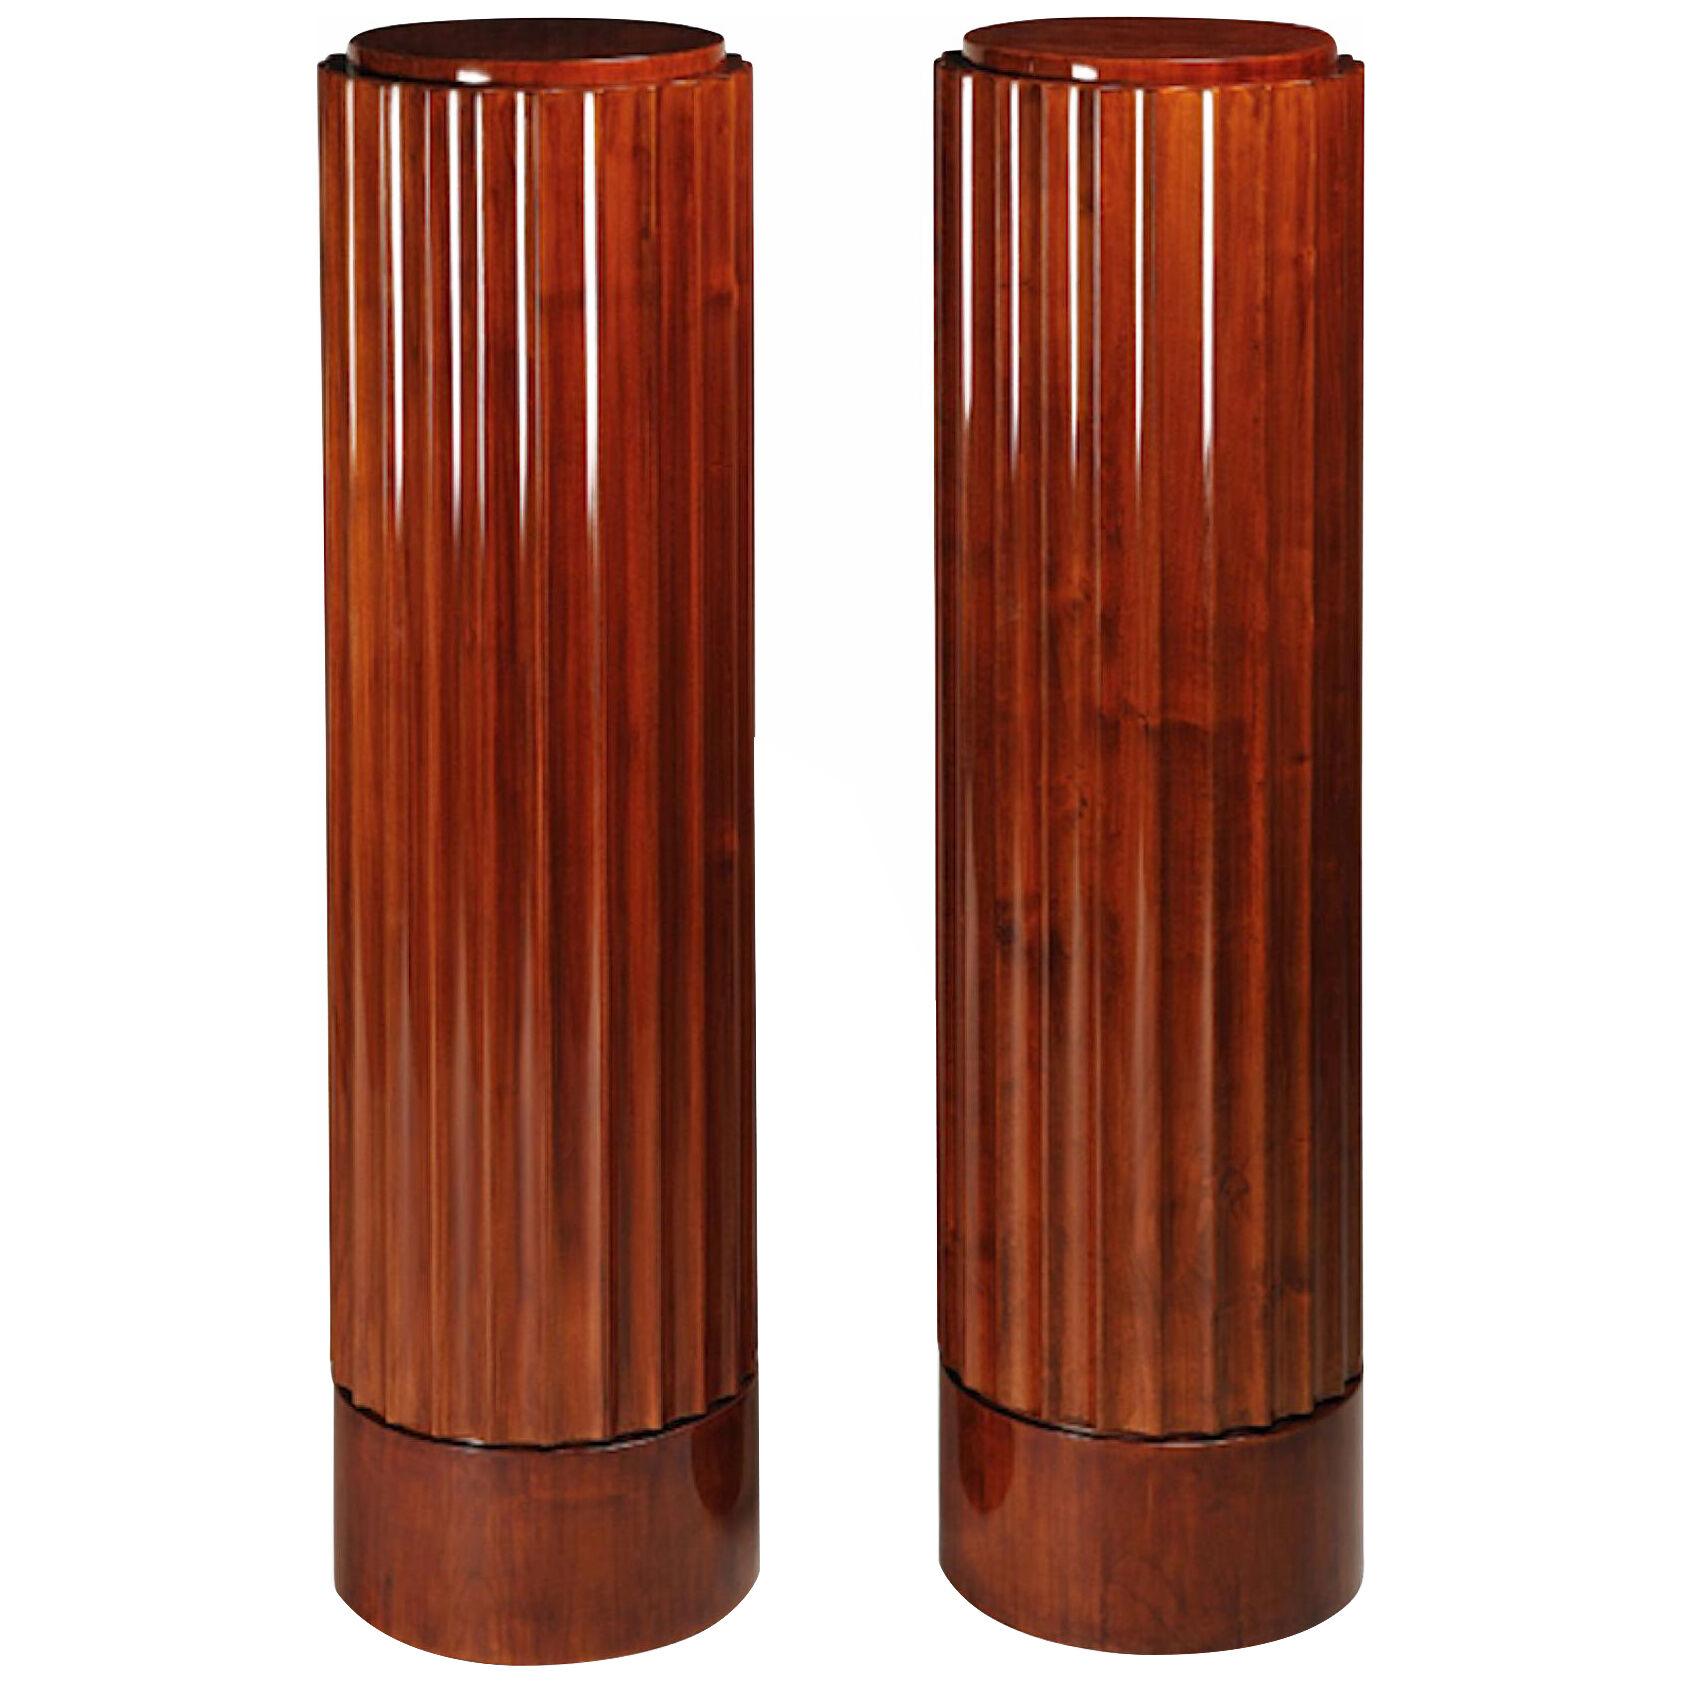 Pair of Neoclassical Style Fluted Pedestals